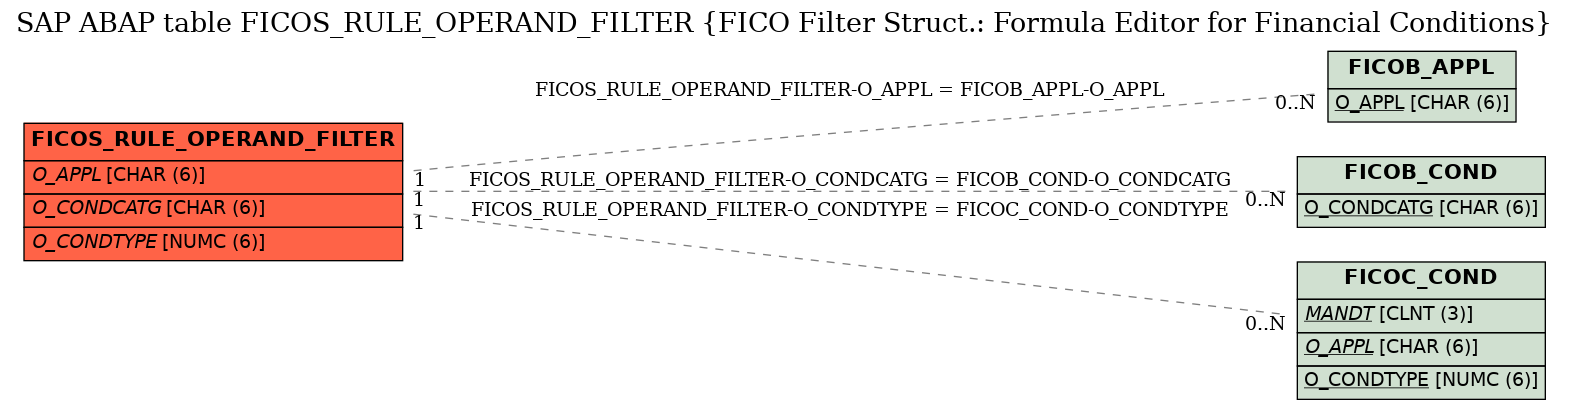 E-R Diagram for table FICOS_RULE_OPERAND_FILTER (FICO Filter Struct.: Formula Editor for Financial Conditions)